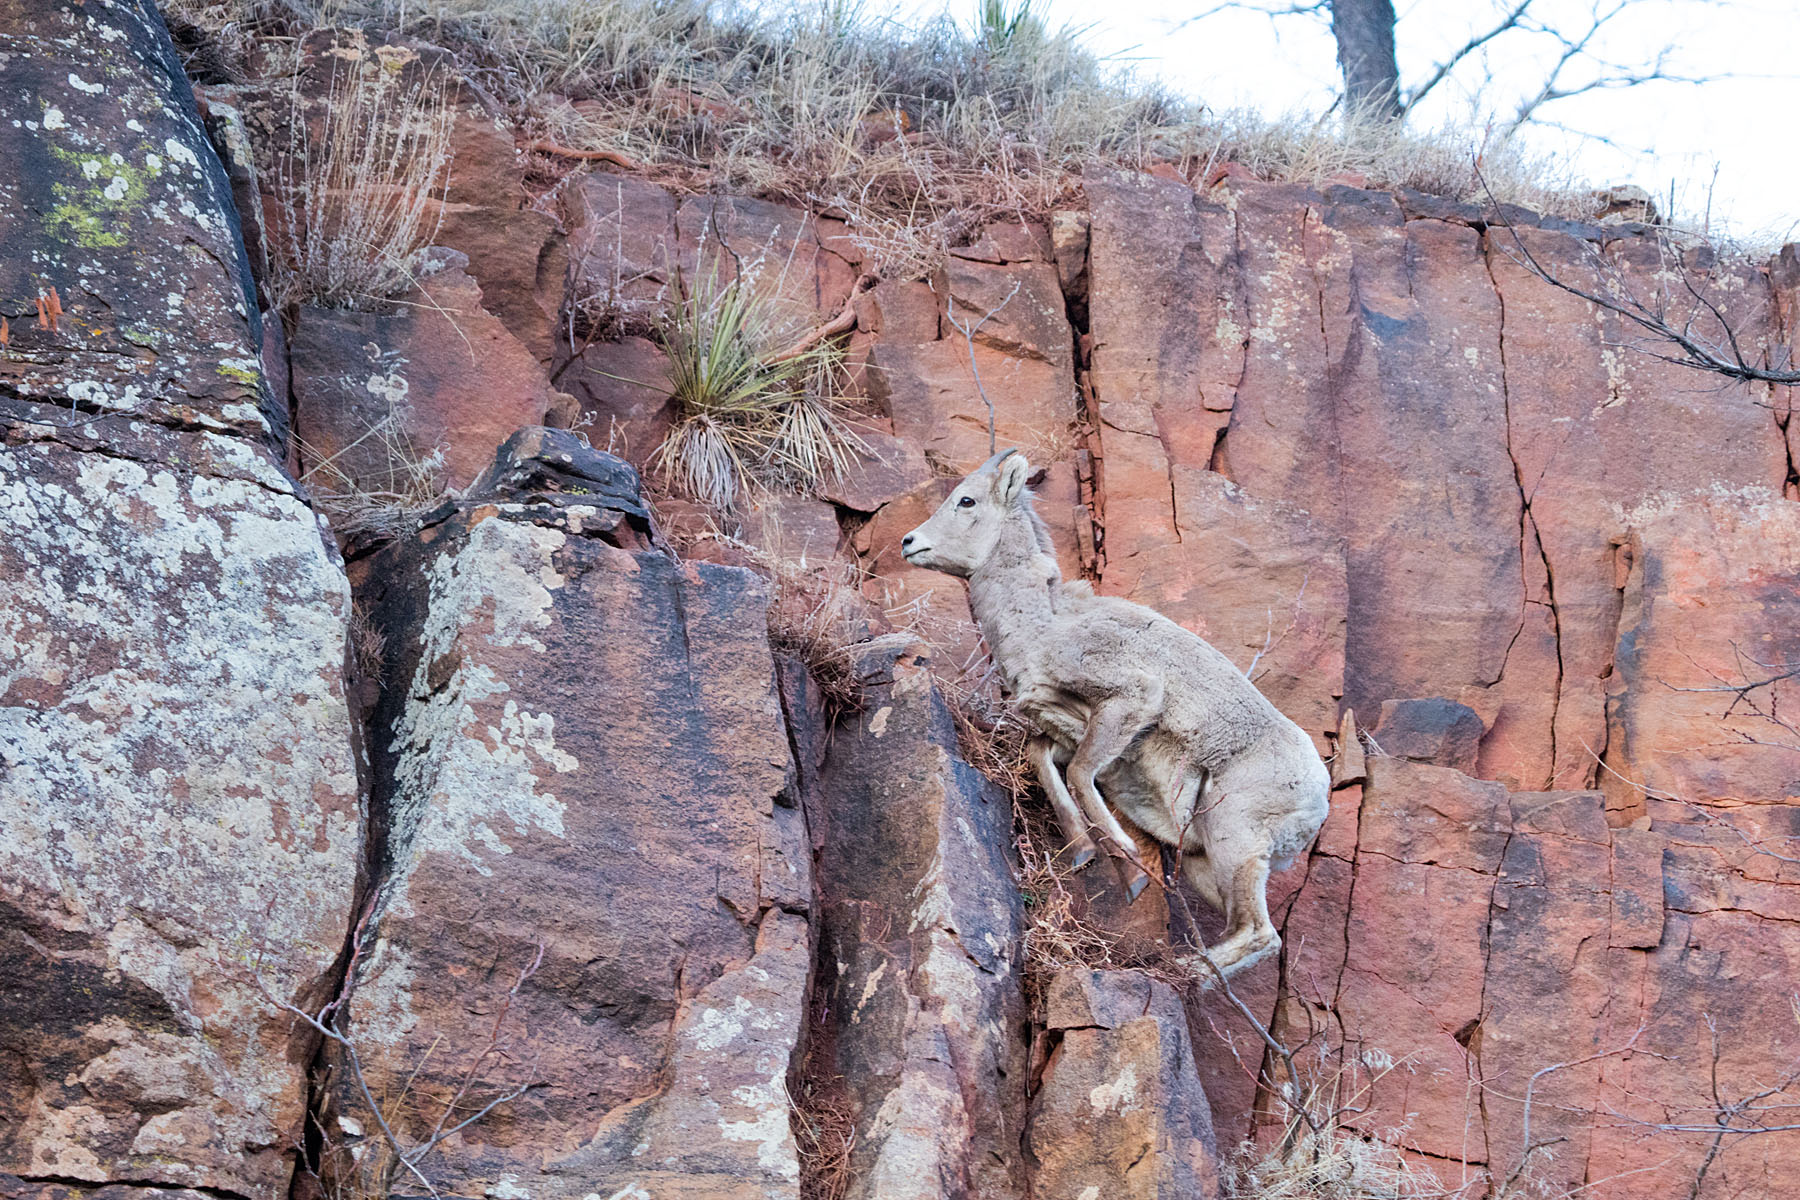 Bighorn lamb climbing the rocks behind Custer State Park Visitor Center.  Click for next photo.